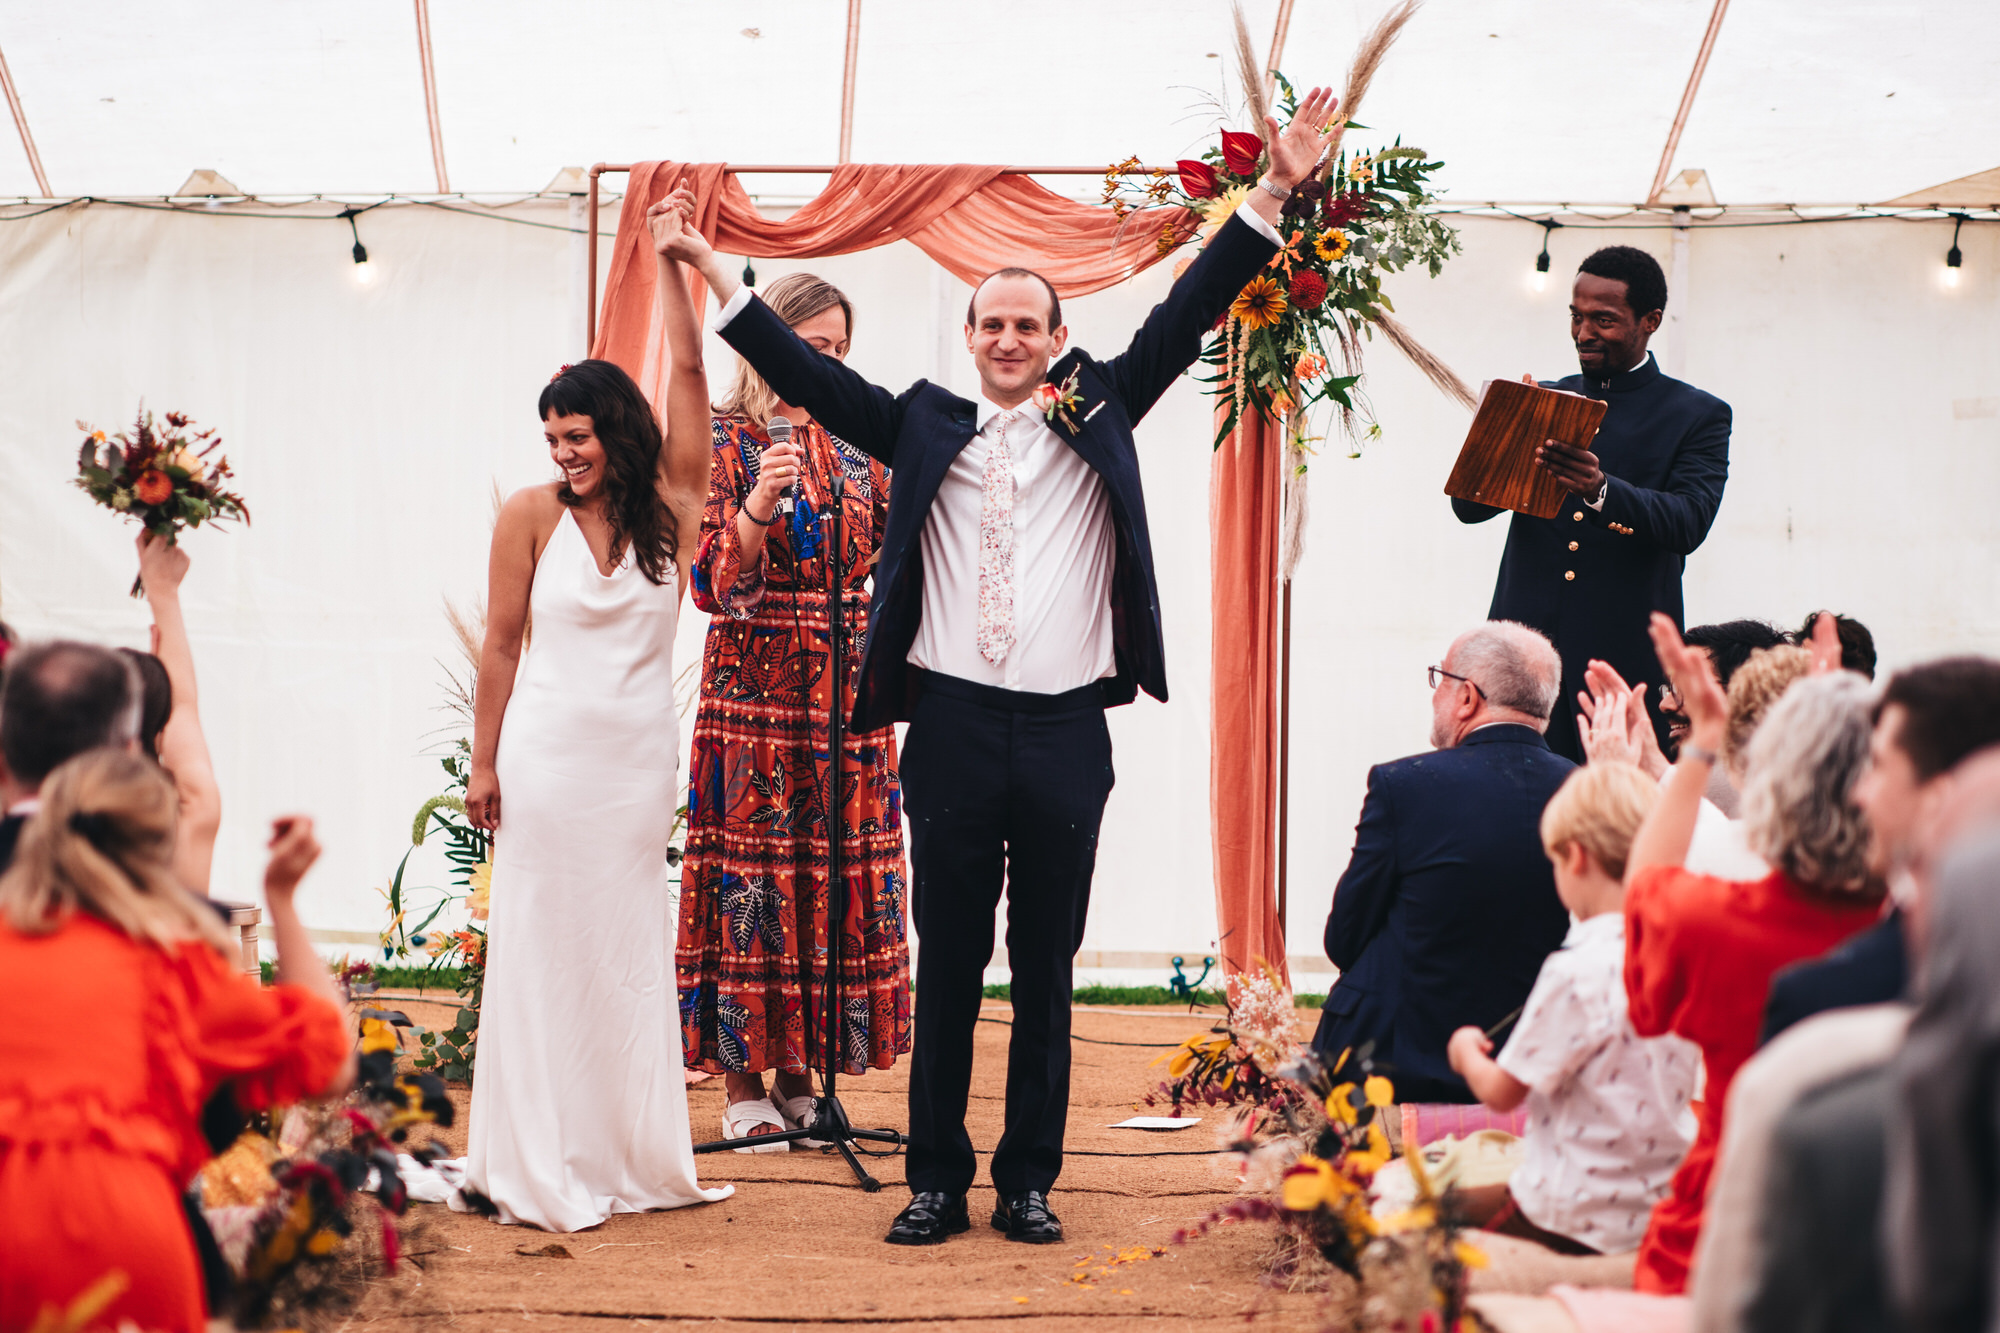 bride and groom married holding hands in air while guests are clapping